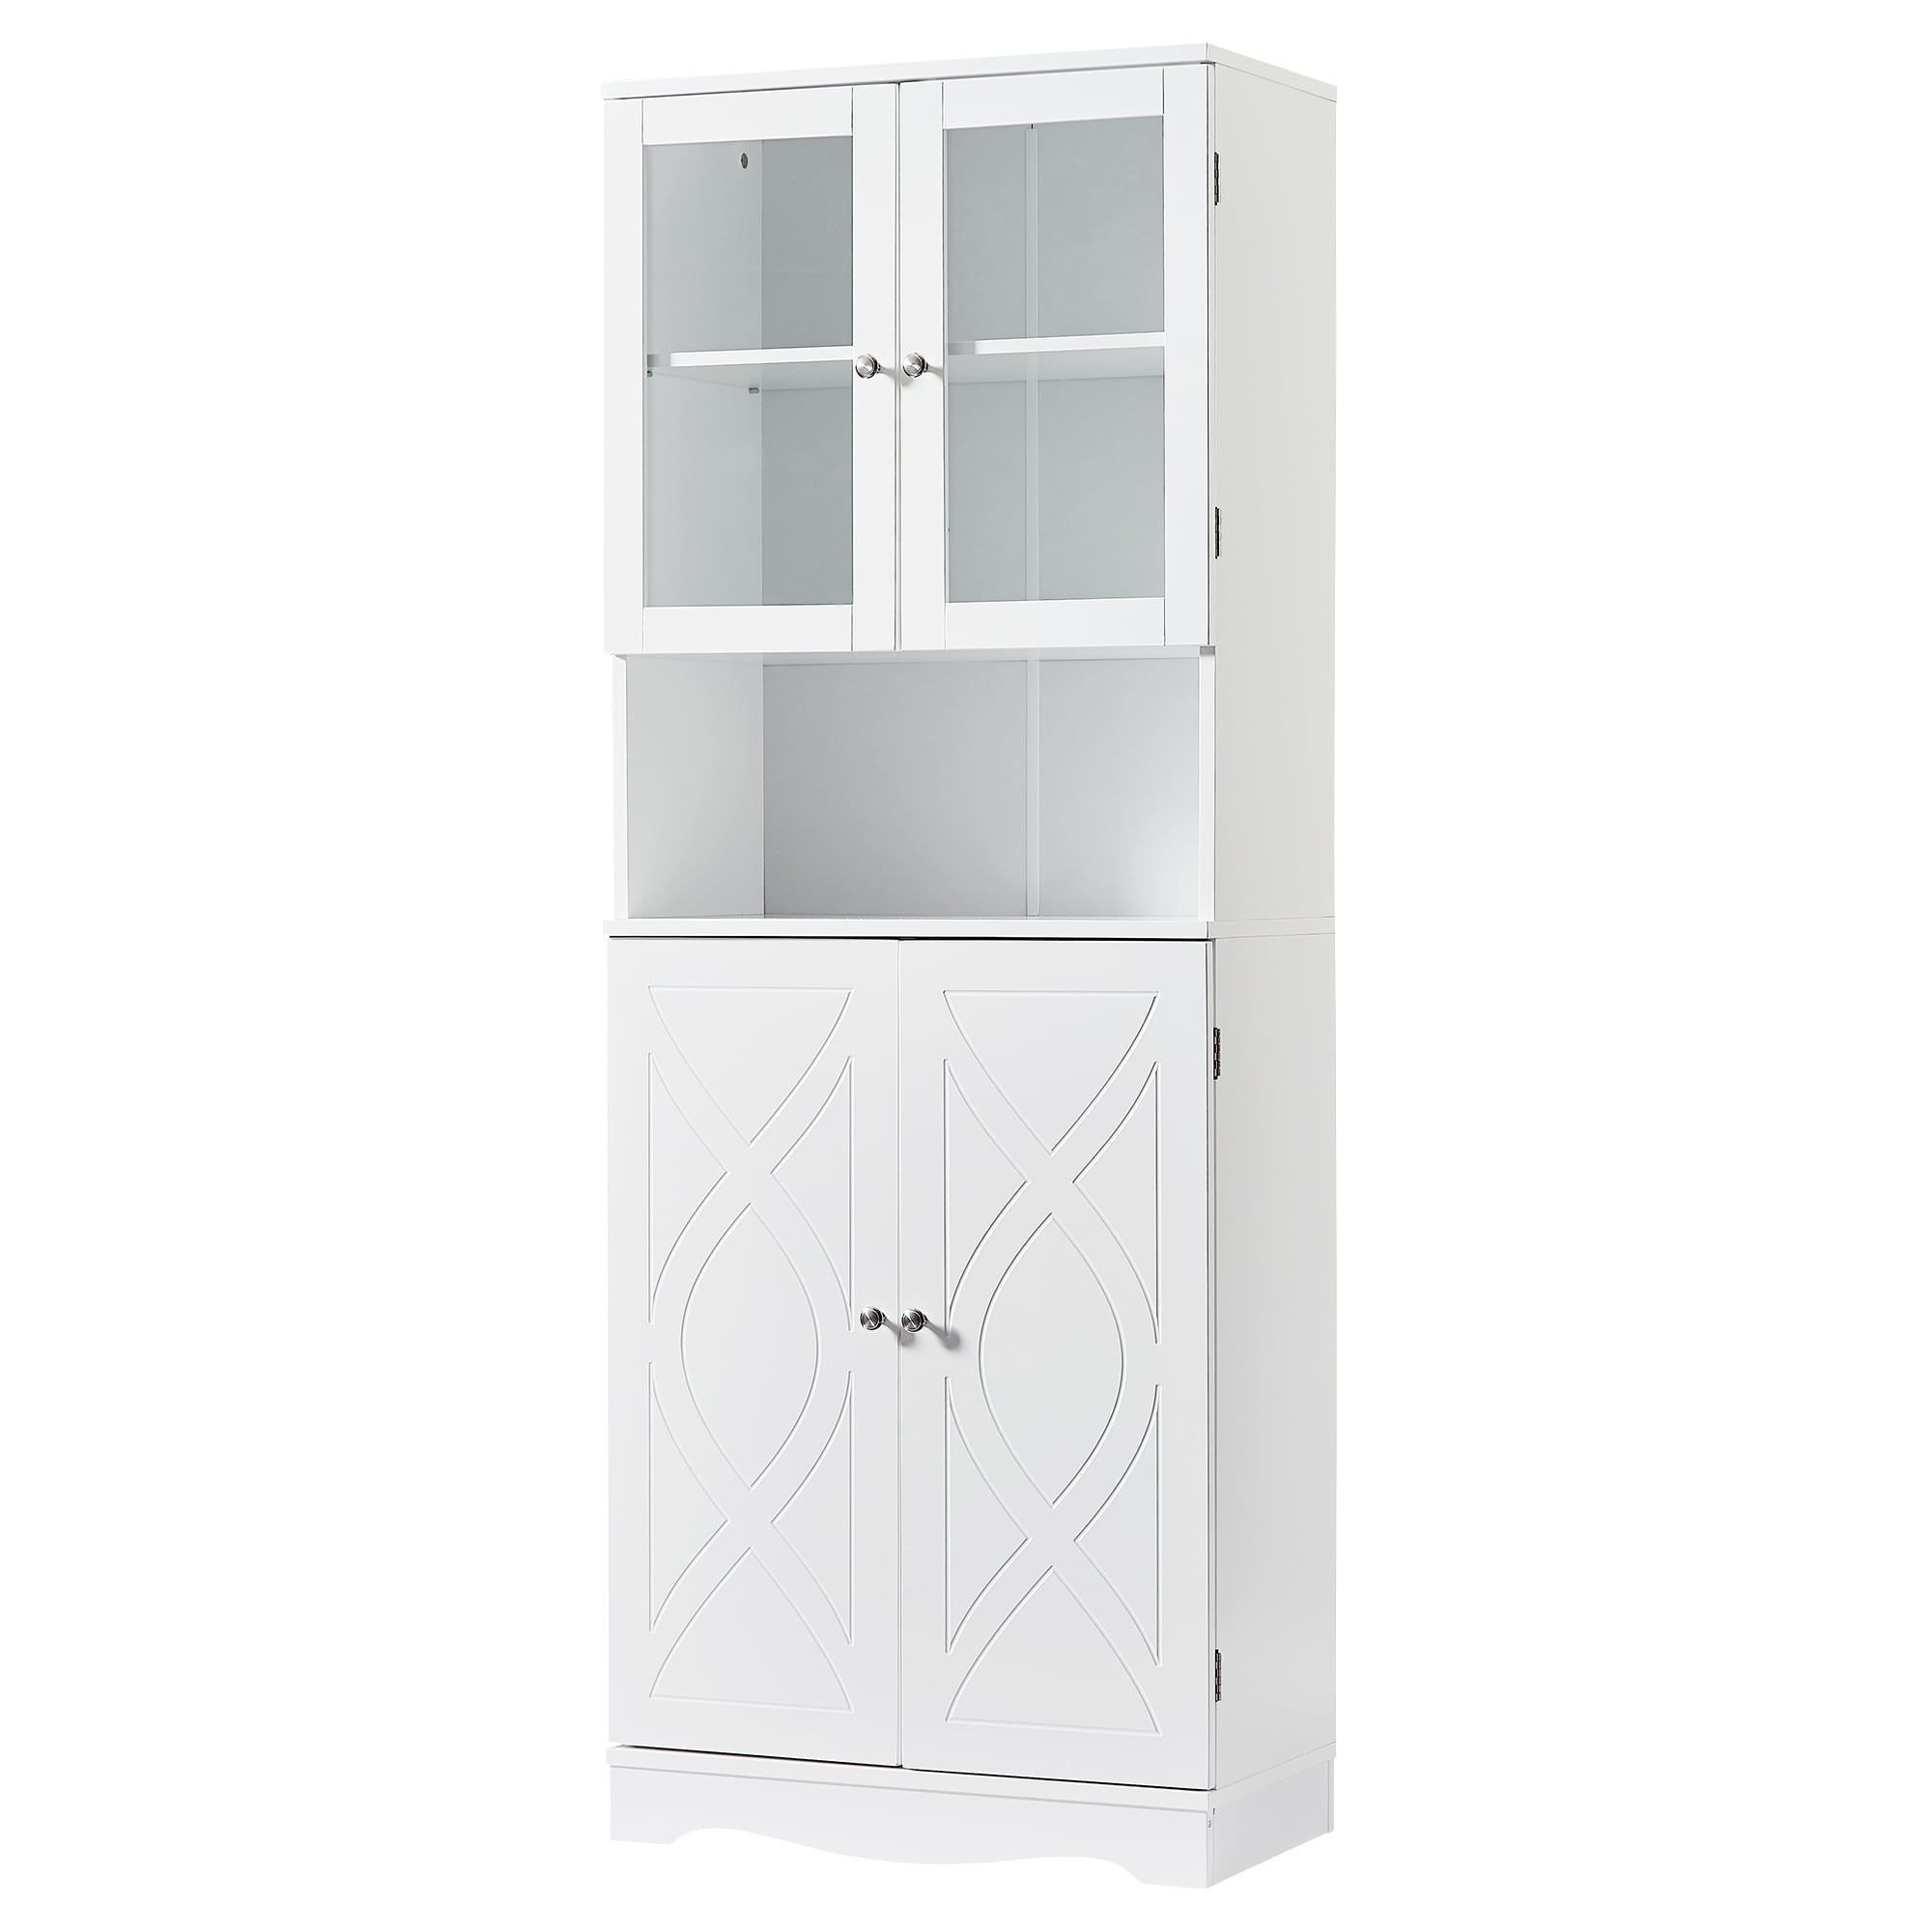 Tall Storage Cabinet With Glass Doors - WF299283AAK